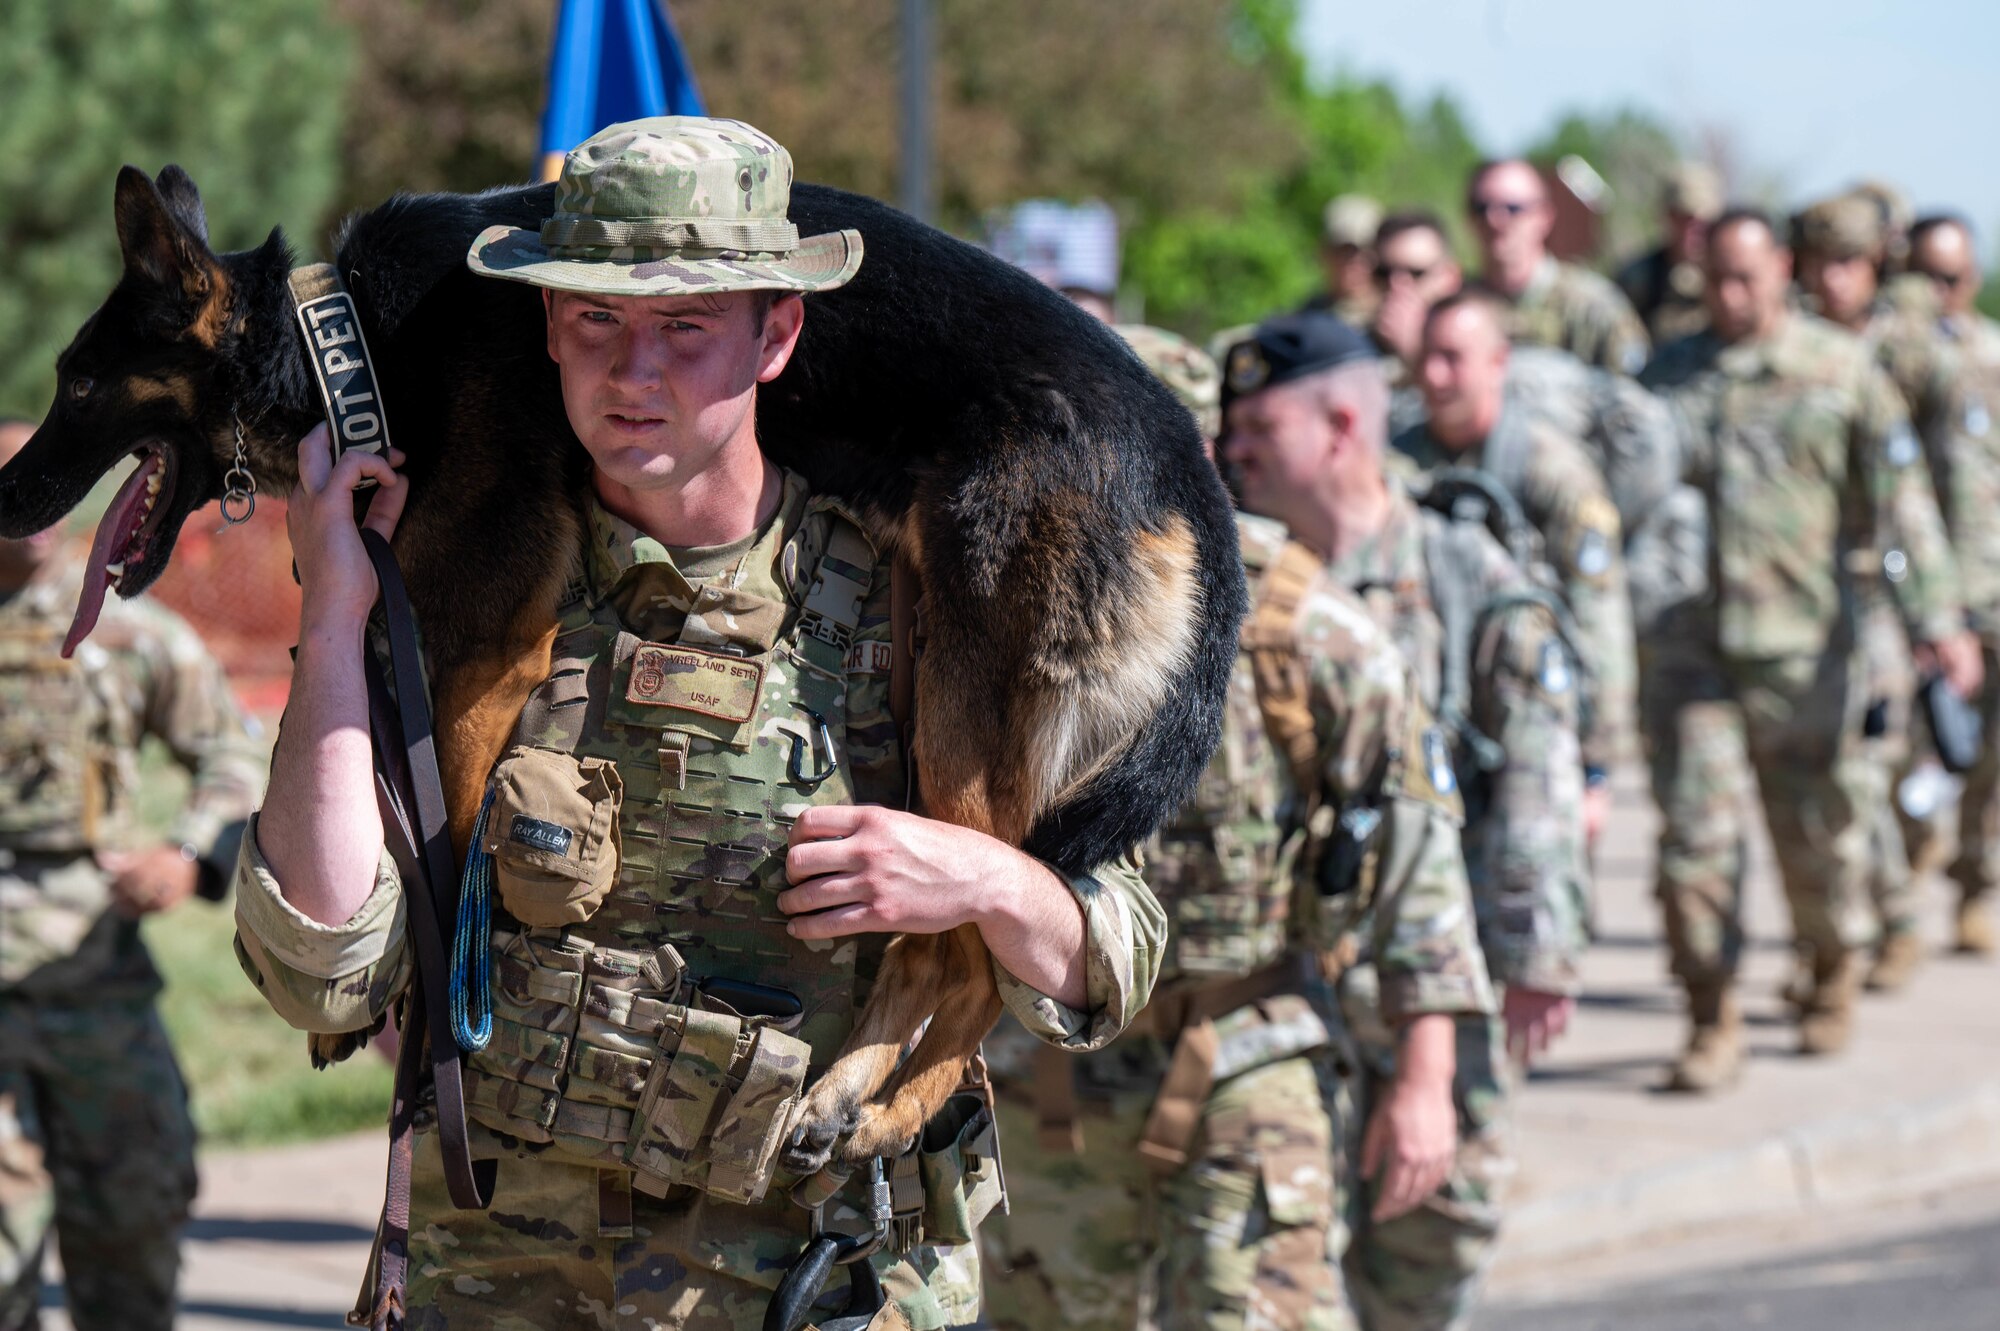 Senior Airman Seth Vreeland, a K-9 handler with the 460th Security Forces Squadron, carries Military Working Dog Ketty